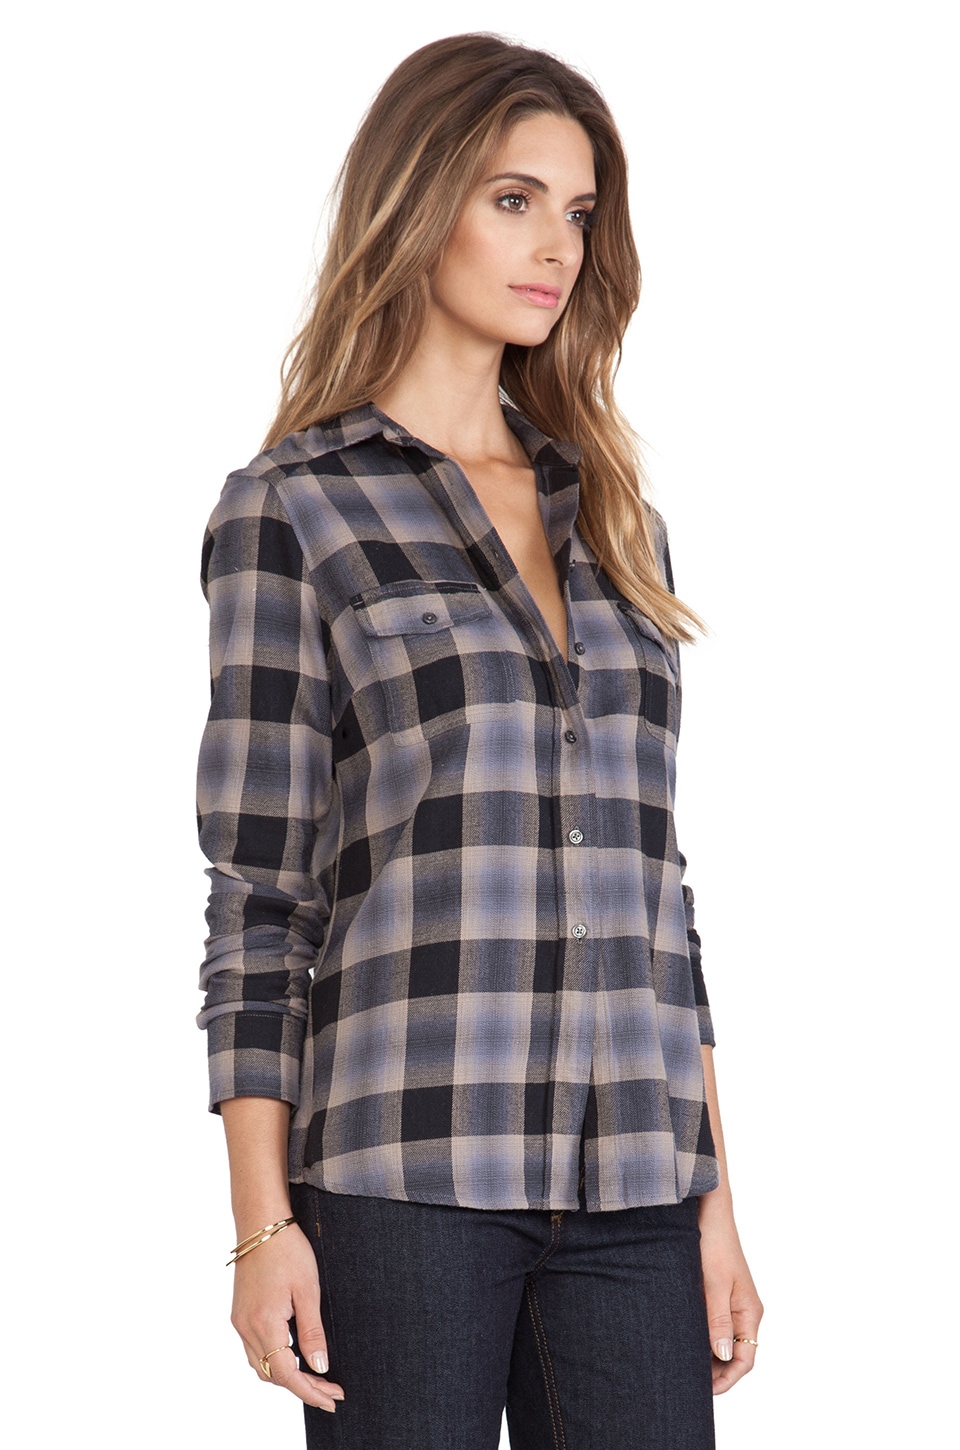 Steve Madden Collective Daisy Plaid Flannel Shirt in Black | REVOLVE